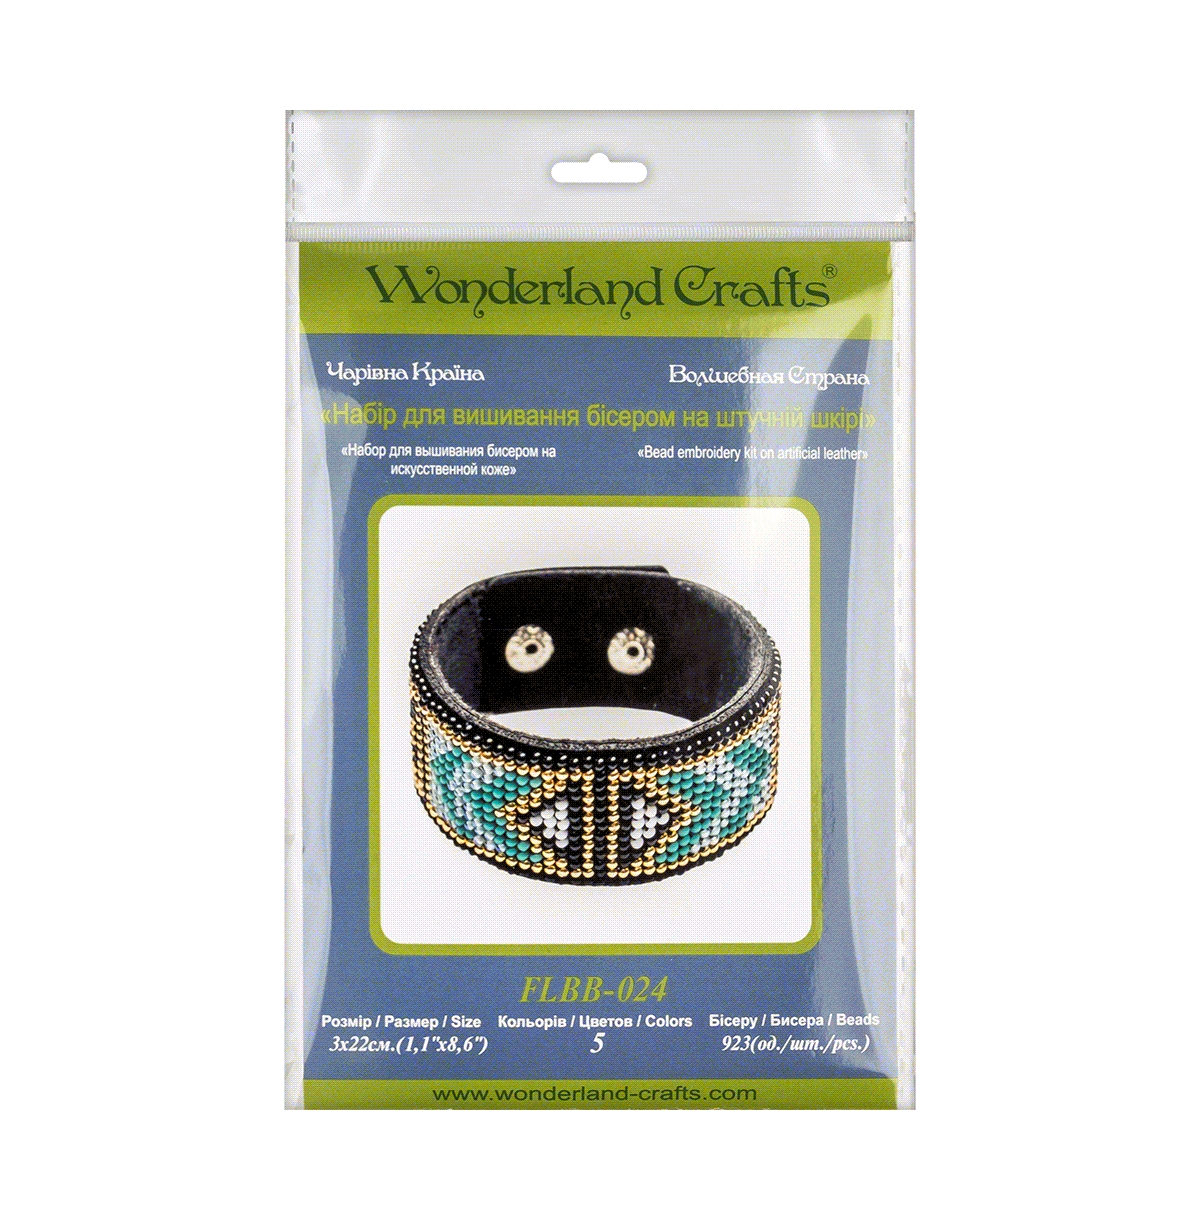 Bead embroidery kit on artificial leather Bracelet - Assorted Pre-pack (See Table